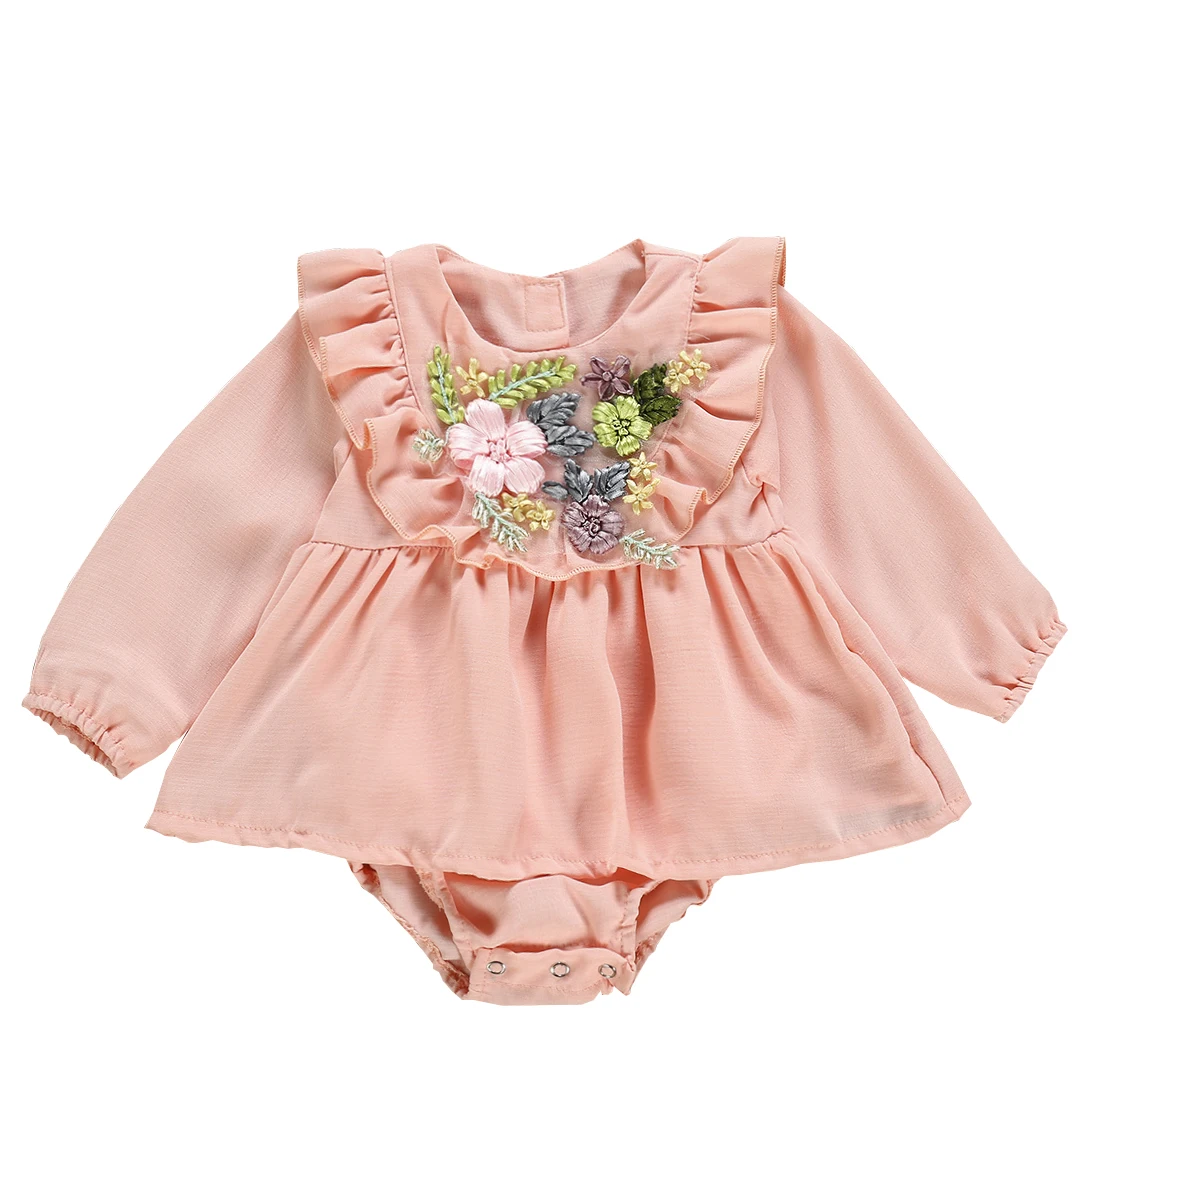 Cute Newborn Baby Girl Long Sleeve Floral Solid Color Dress Romper Jumpsuit Playsuit Outfits Baby Clothes - Цвет: Розовый